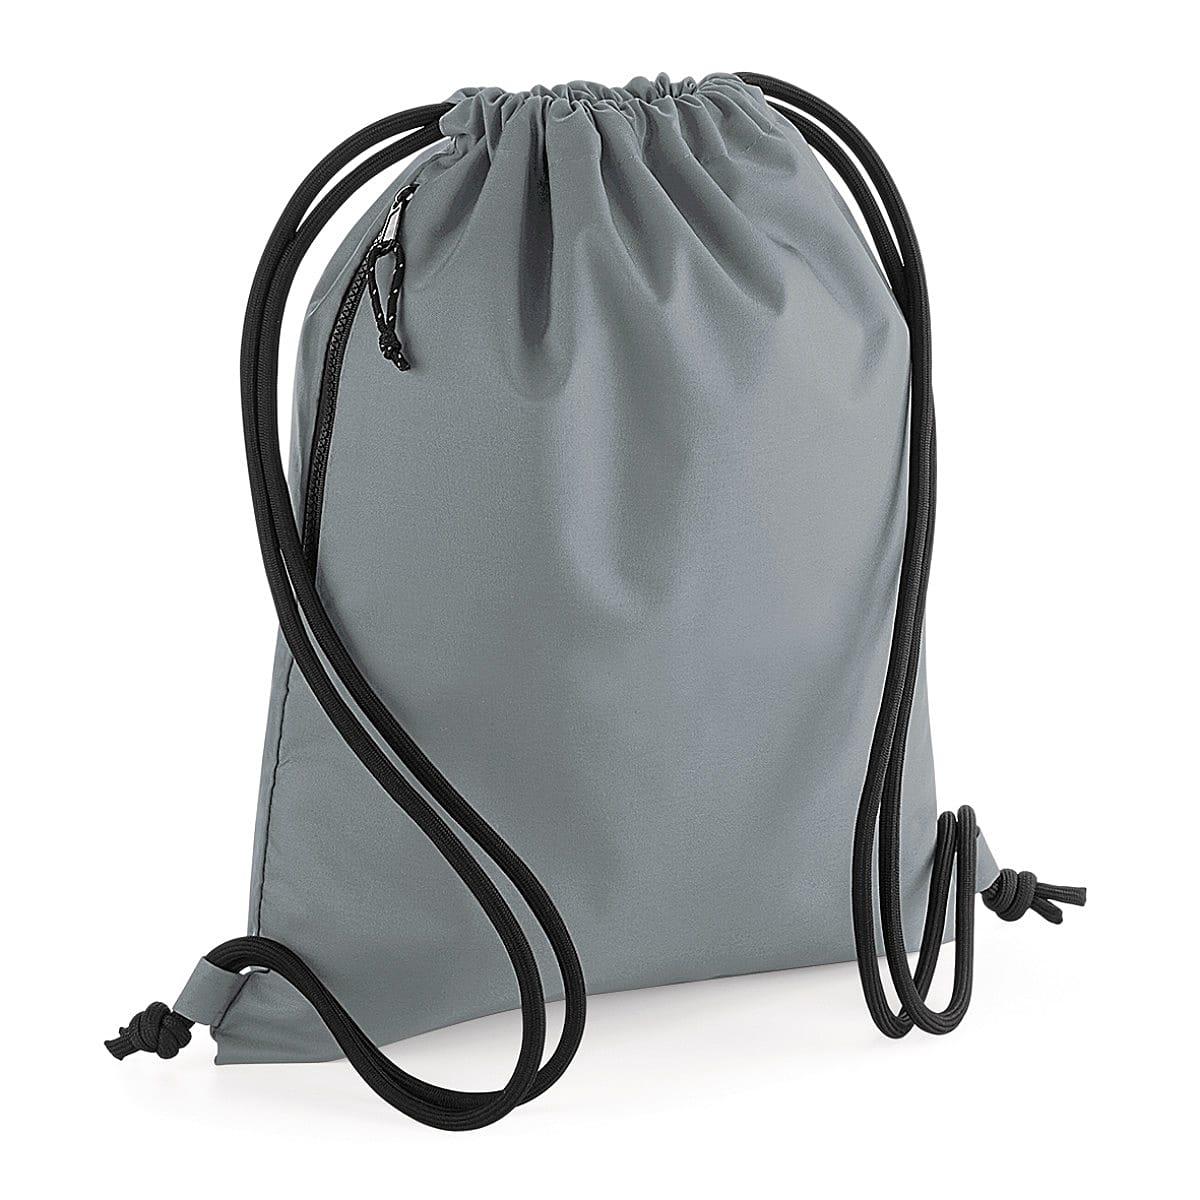 Bagbase Recycled Gymsac in Pure Grey (Product Code: BG281)